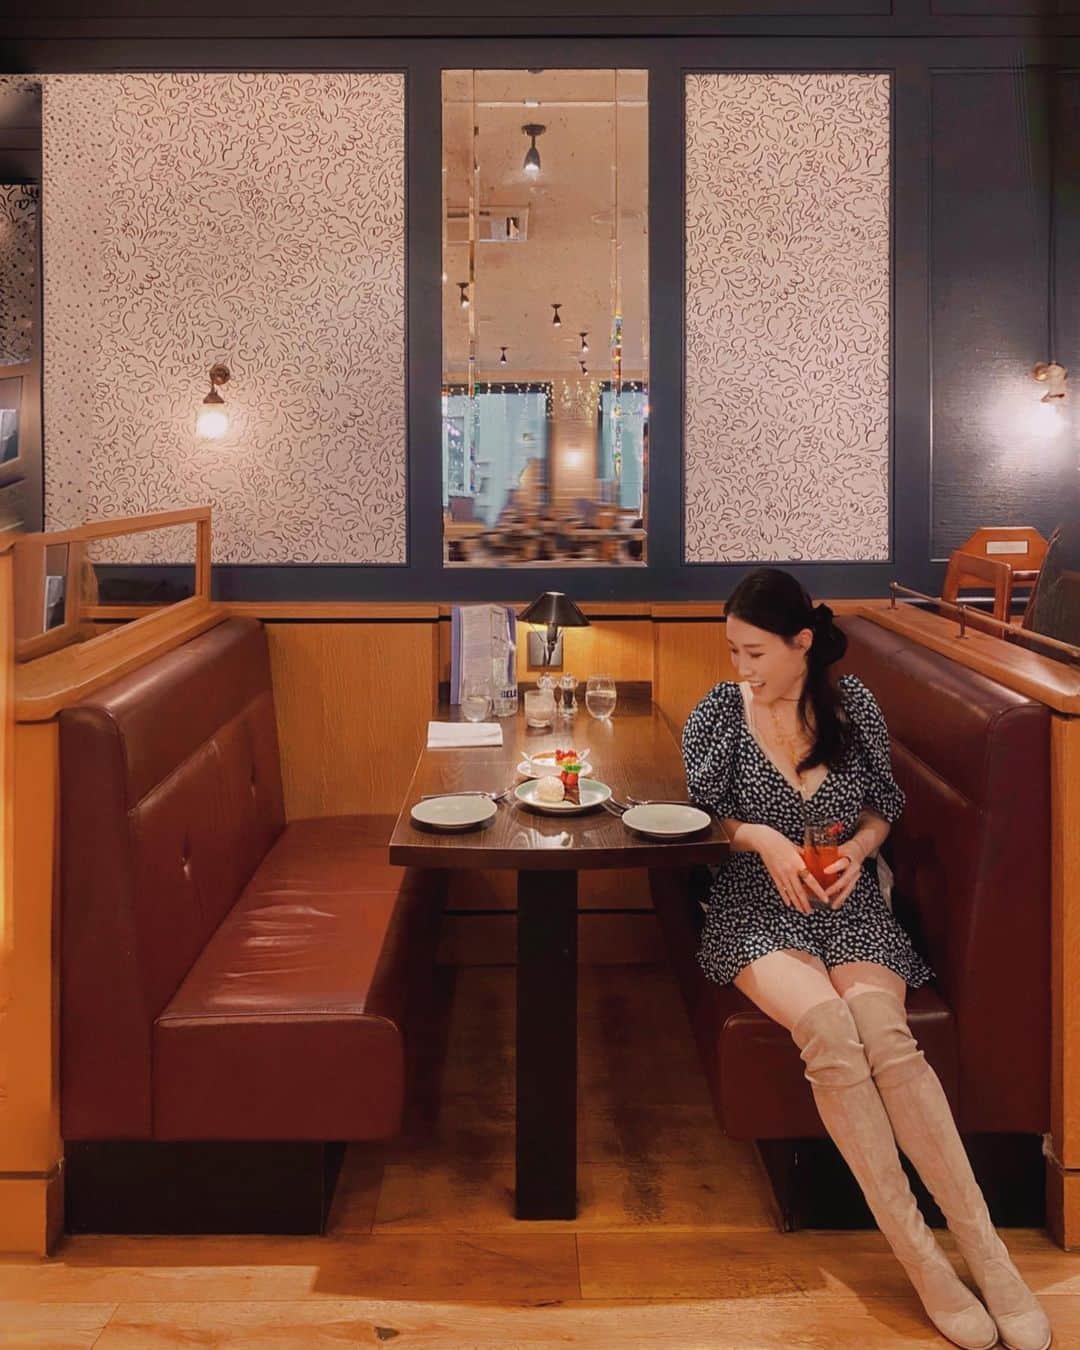 LIKARANAIさんのインスタグラム写真 - (LIKARANAIInstagram)「Pretending I’m in Paris🇫🇷🎄 Côte is one of those restaurants where you know you will always get good food and offers French inspired dining. Côte Woking also has great staff, they’re friendly, knowledgeable, polite and attentive which makes for a great lunch experience.  We opted for the Christmas taste Menu de Noël, as it is the festive season🎄✨ The menu is a three course set meal costing £37.95 per person.  We started off with these two new Christmas cocktails : 🍸 Sloe Pétiller Portobello sloeberry & blackcurrant gin, lemon juice & cream soda, garnished with redcurrants.  🥃 Blanc Noël The rich and Creamy Blanc Noël mixes Vodka, Mr Black coffee liqueur, cream & Norfolk Nog whisky cream, garnished with a cinnamon stick & dusted with cocoa powder.  And for starters, we had the Smoked Salmon Tartare and Prawn Thermidor. The starters served with sourdough baguette. Smoked salmon tartare consisted on marinated beetroot with citrus crème fraîche & dill and King prawns cooked in a lobster mornay gratin with Comté cheese, an apple & herb garnish.  For the mains, we enjoyed : 🥘 Turkey Paupiette British turkey breast with pork & apricot stuffing wrapped in streaky bacon. Served with sage gratin dauphinois, braised red cabbage, French beans, Tenderstem broccoli, Chantenay carrots & cranberry jus. 🥩 Sirloin (8oz) served with frites & a green salad.  For dessert we went for the Chocolate salted caramel tart with raspberries & vanilla ice cream and The winter spiced crème brûlée to make the most of December’s delights!  Check out @coteuk ! It’s the perfect spot for delicious and reasonably priced French food. The Menu de Noëlis a real treat and stunning value! Thank you Côte of Woking.  *pr invite  。 。 。 。 。 。  #Côte #MenudeNoël #cote #menudenoel #christmasfood #cotebrasserie #christmaslunch #surrey #woking #london #londoneats ##londonfoodie #londonfoodscene #food #londonfoodspots #londonfoodgram #visitlondon #londontravel #explorelondon #england #uk #likeforlikes #shoutout #コメント返し  #写真好きな人と繋がりたい」12月8日 23時00分 - likaran